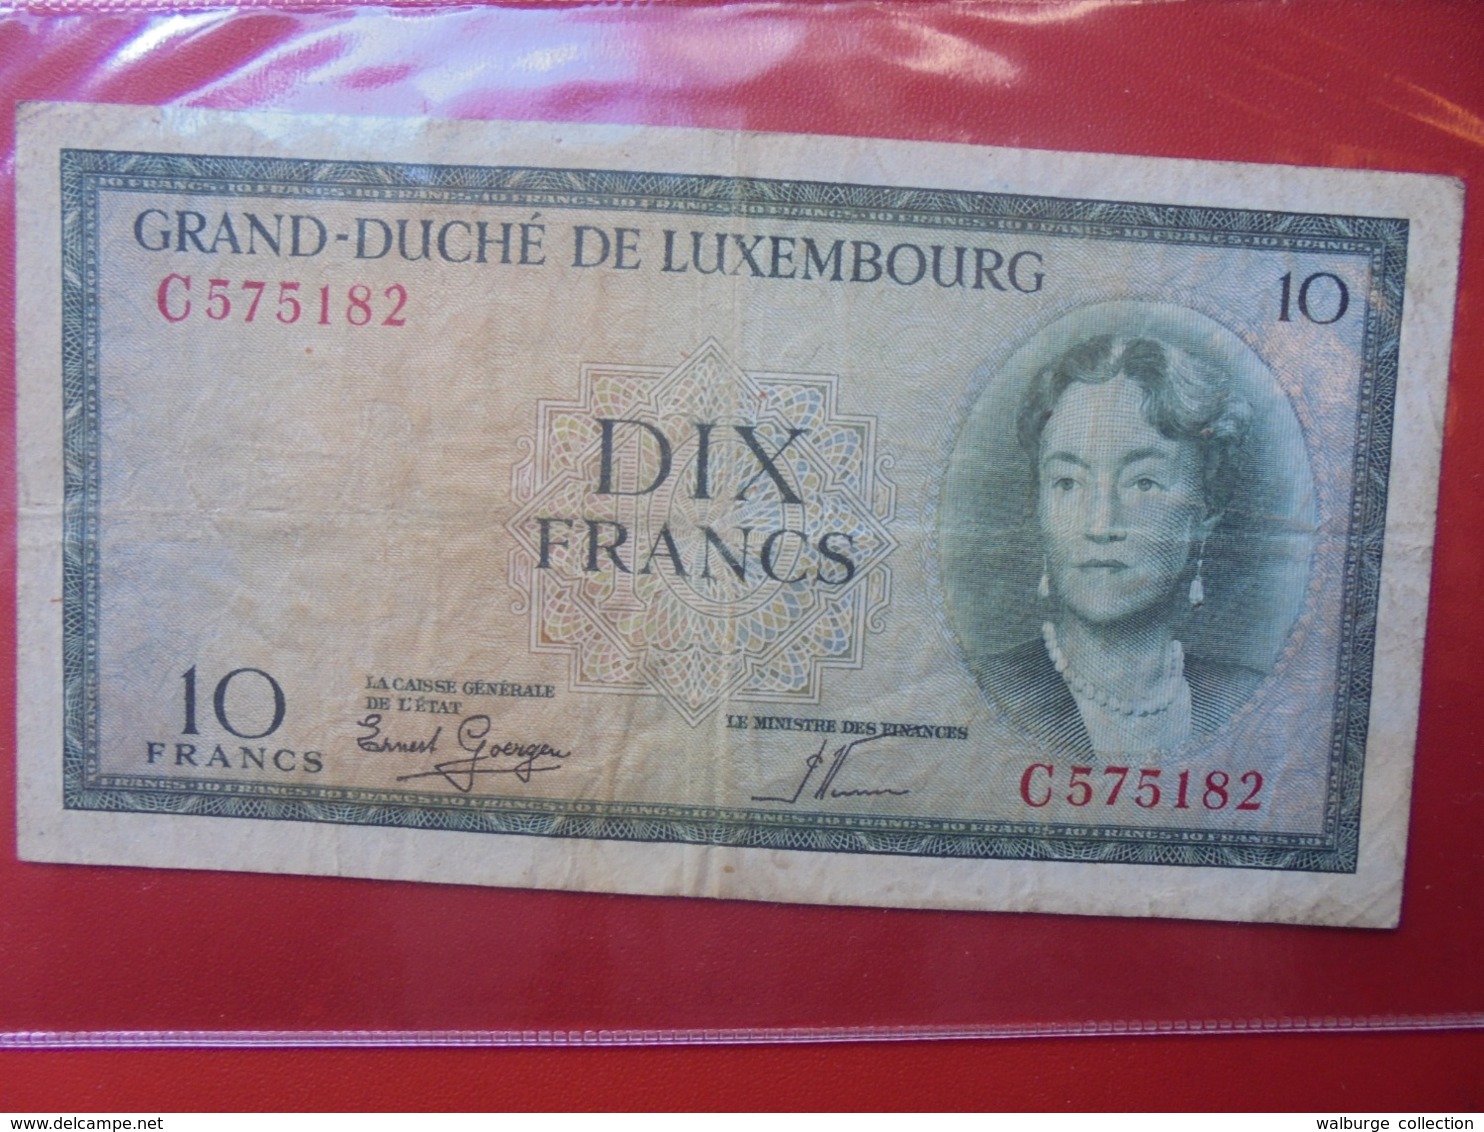 LUXEMBOURG 10 FRANCS (NON-DATE) CIRCULER (B.7) - Luxemburg